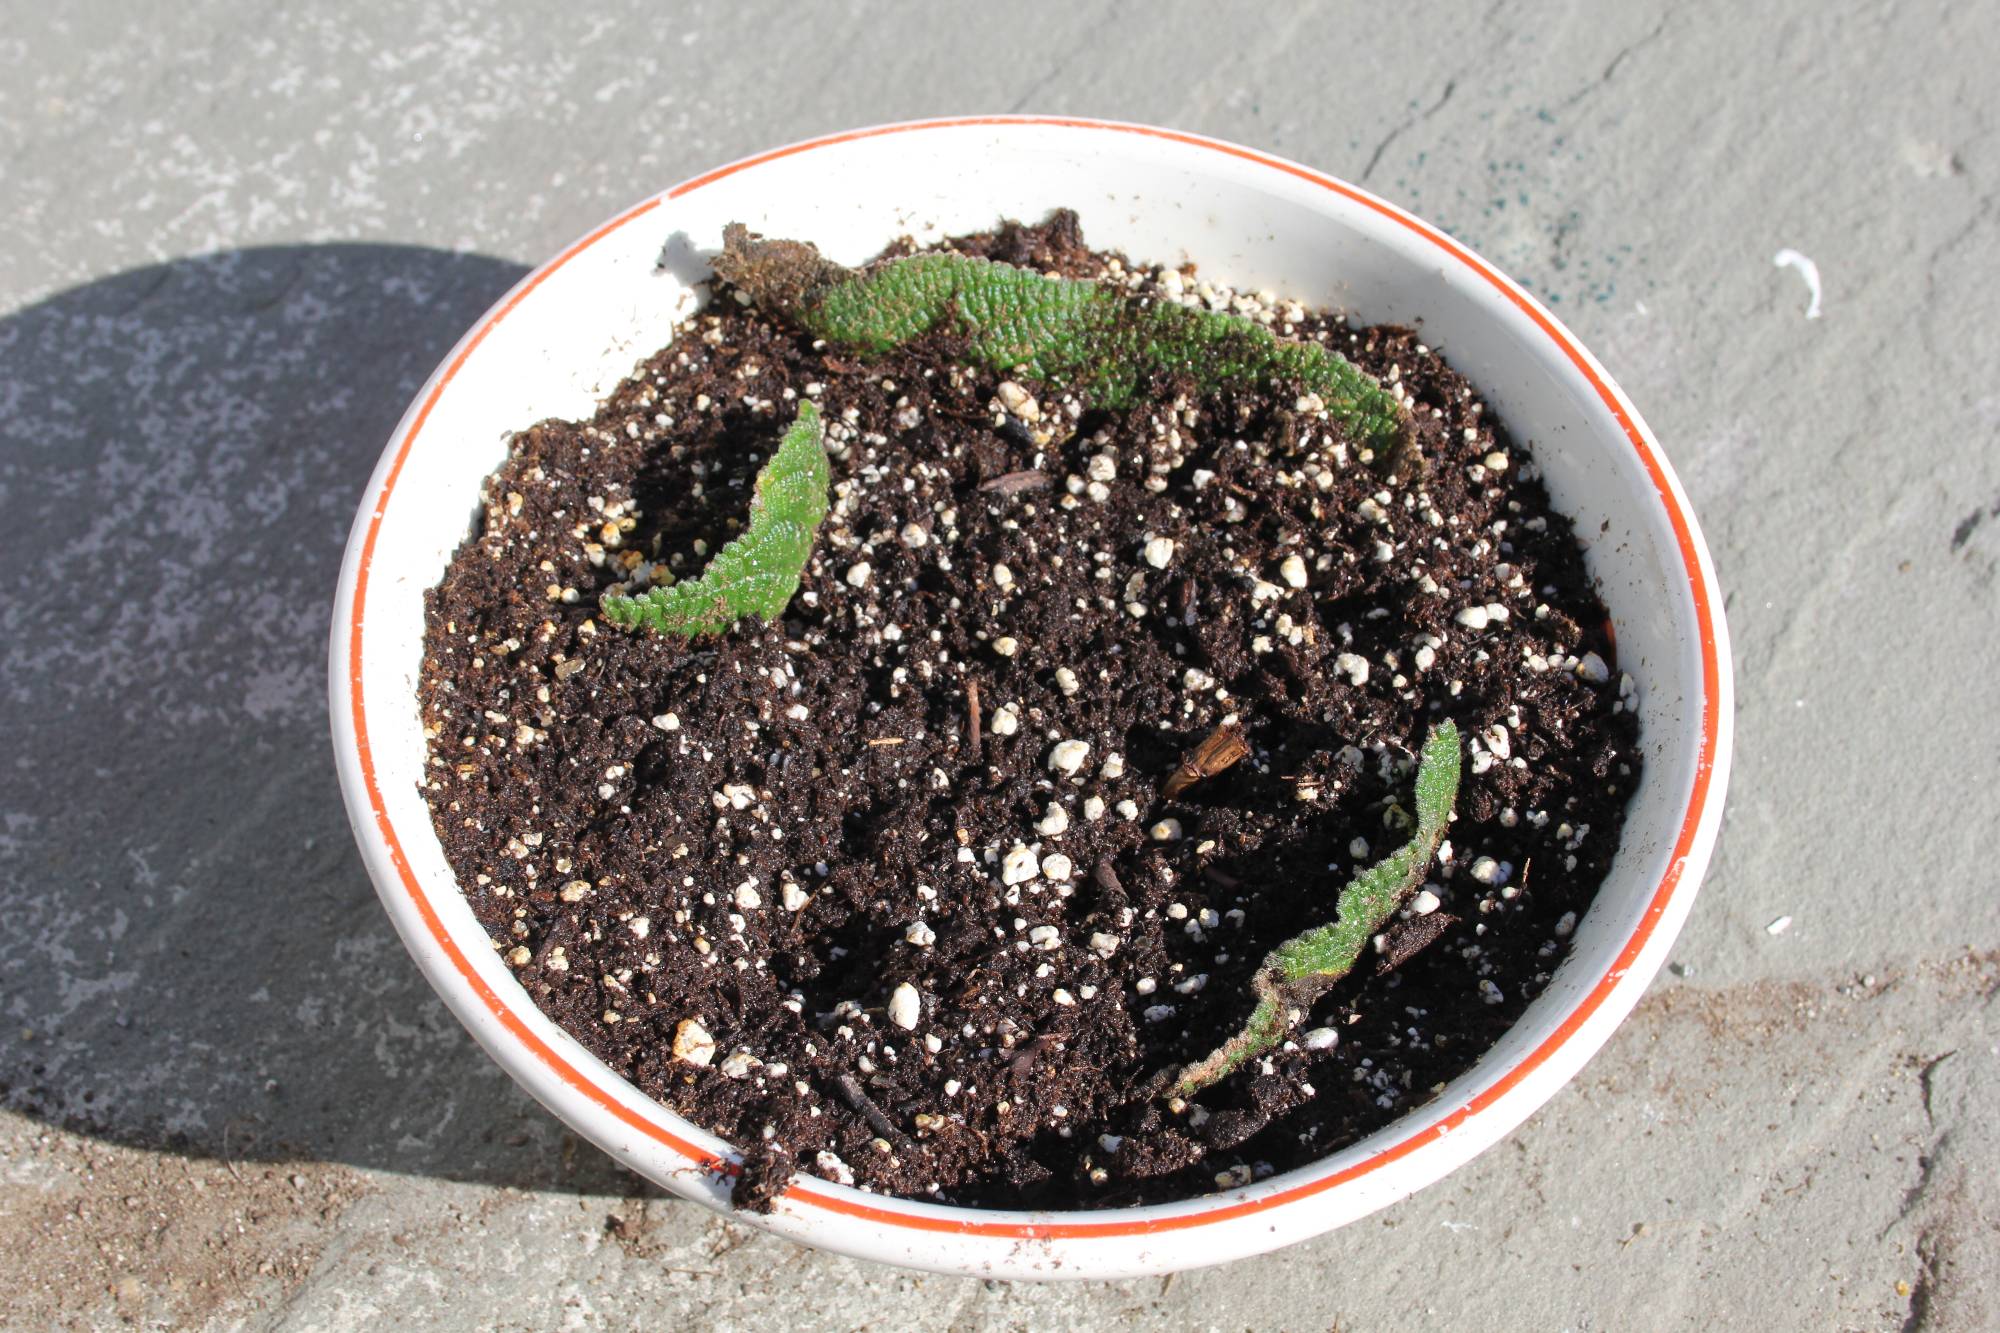 Leaves-set-in-potting-soil-after-being-treated-with-hormone-powder